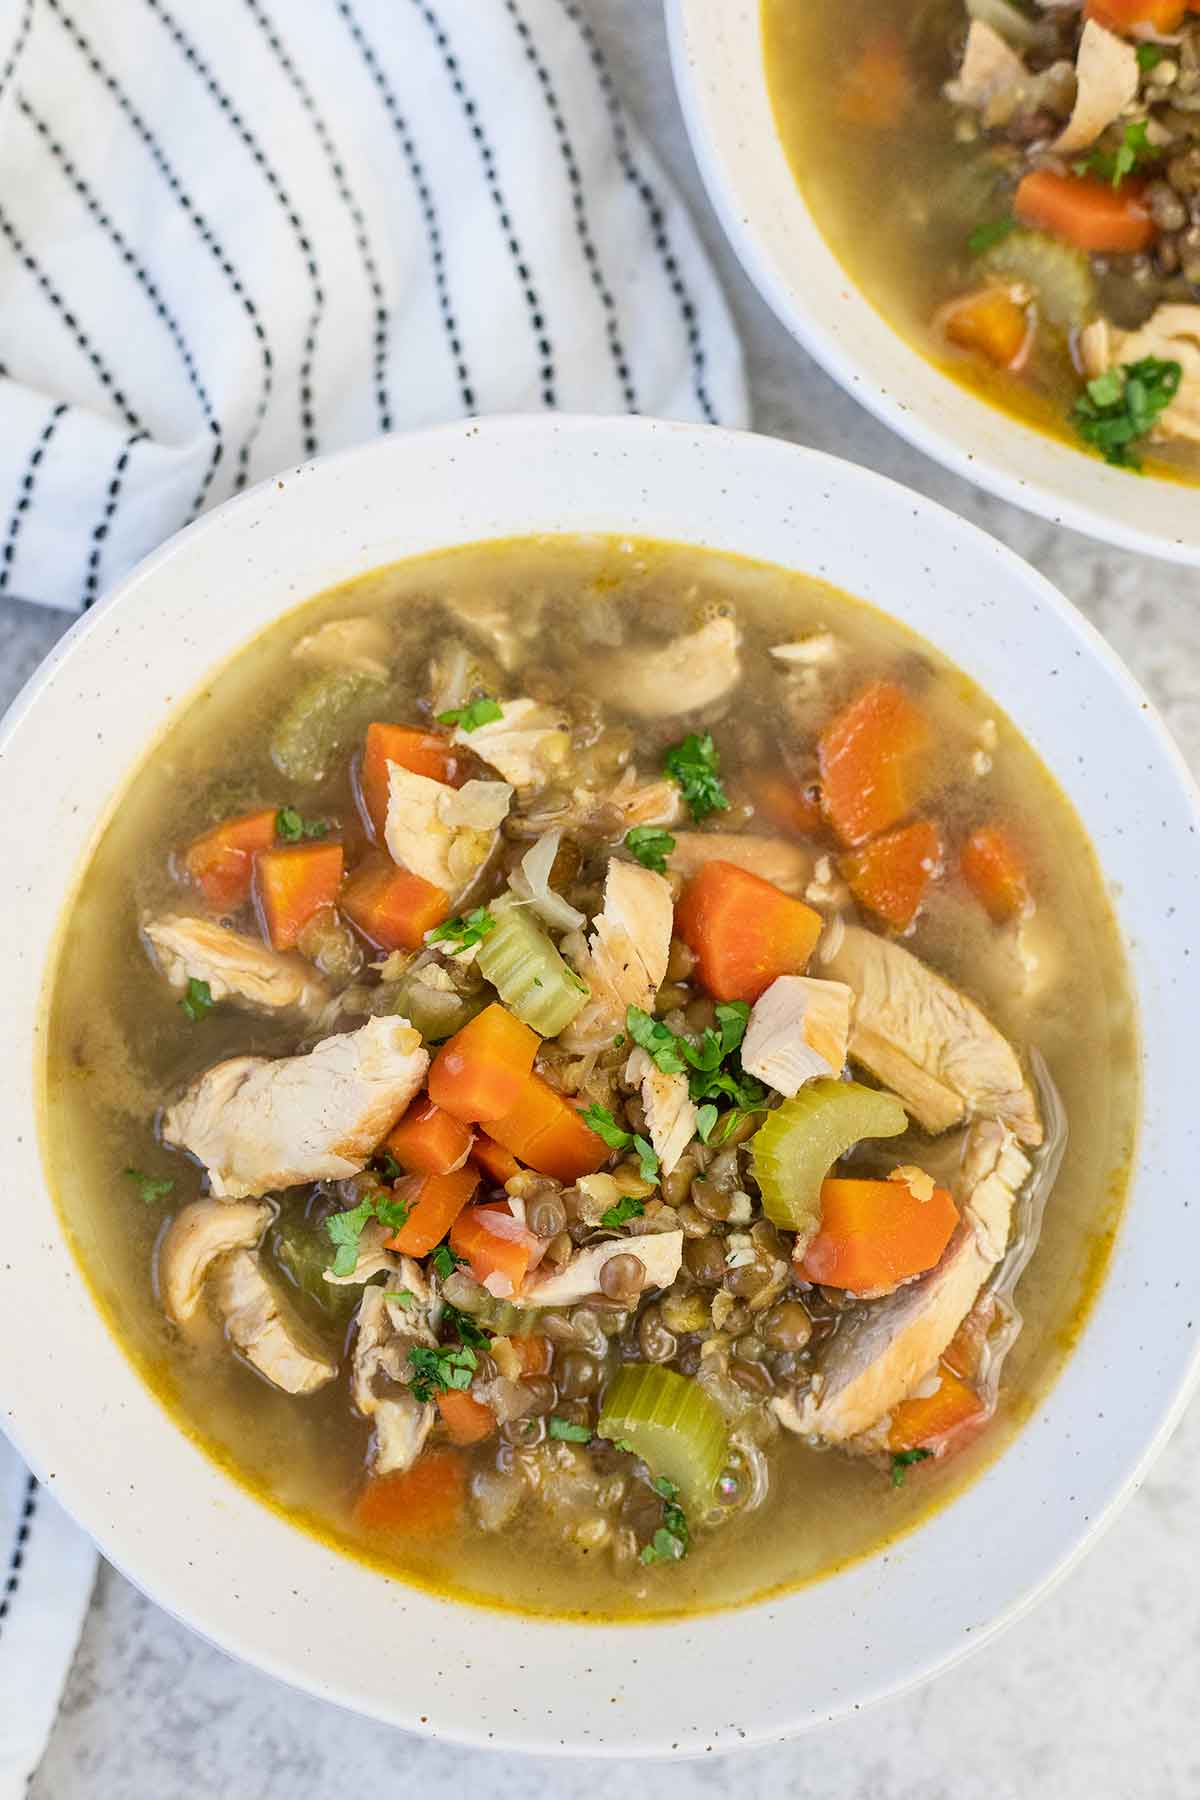 A bowl of chicken lentil soup with carrot and celery.